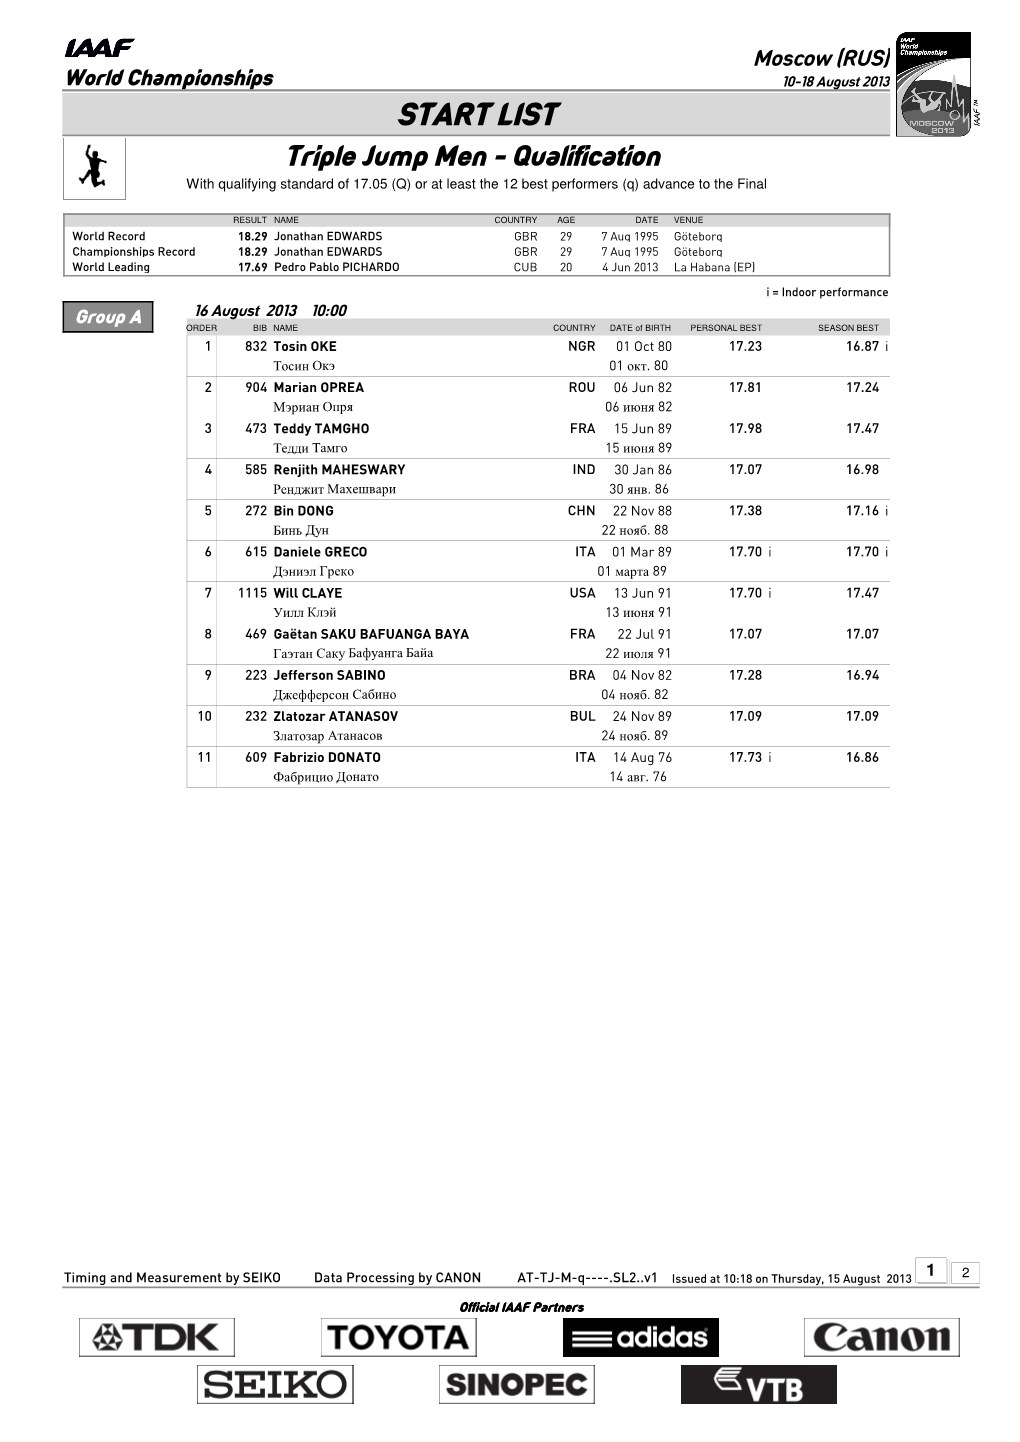 START LIST Triple Jump Men - Qualification with Qualifying Standard of 17.05 (Q) Or at Least the 12 Best Performers (Q) Advance to the Final